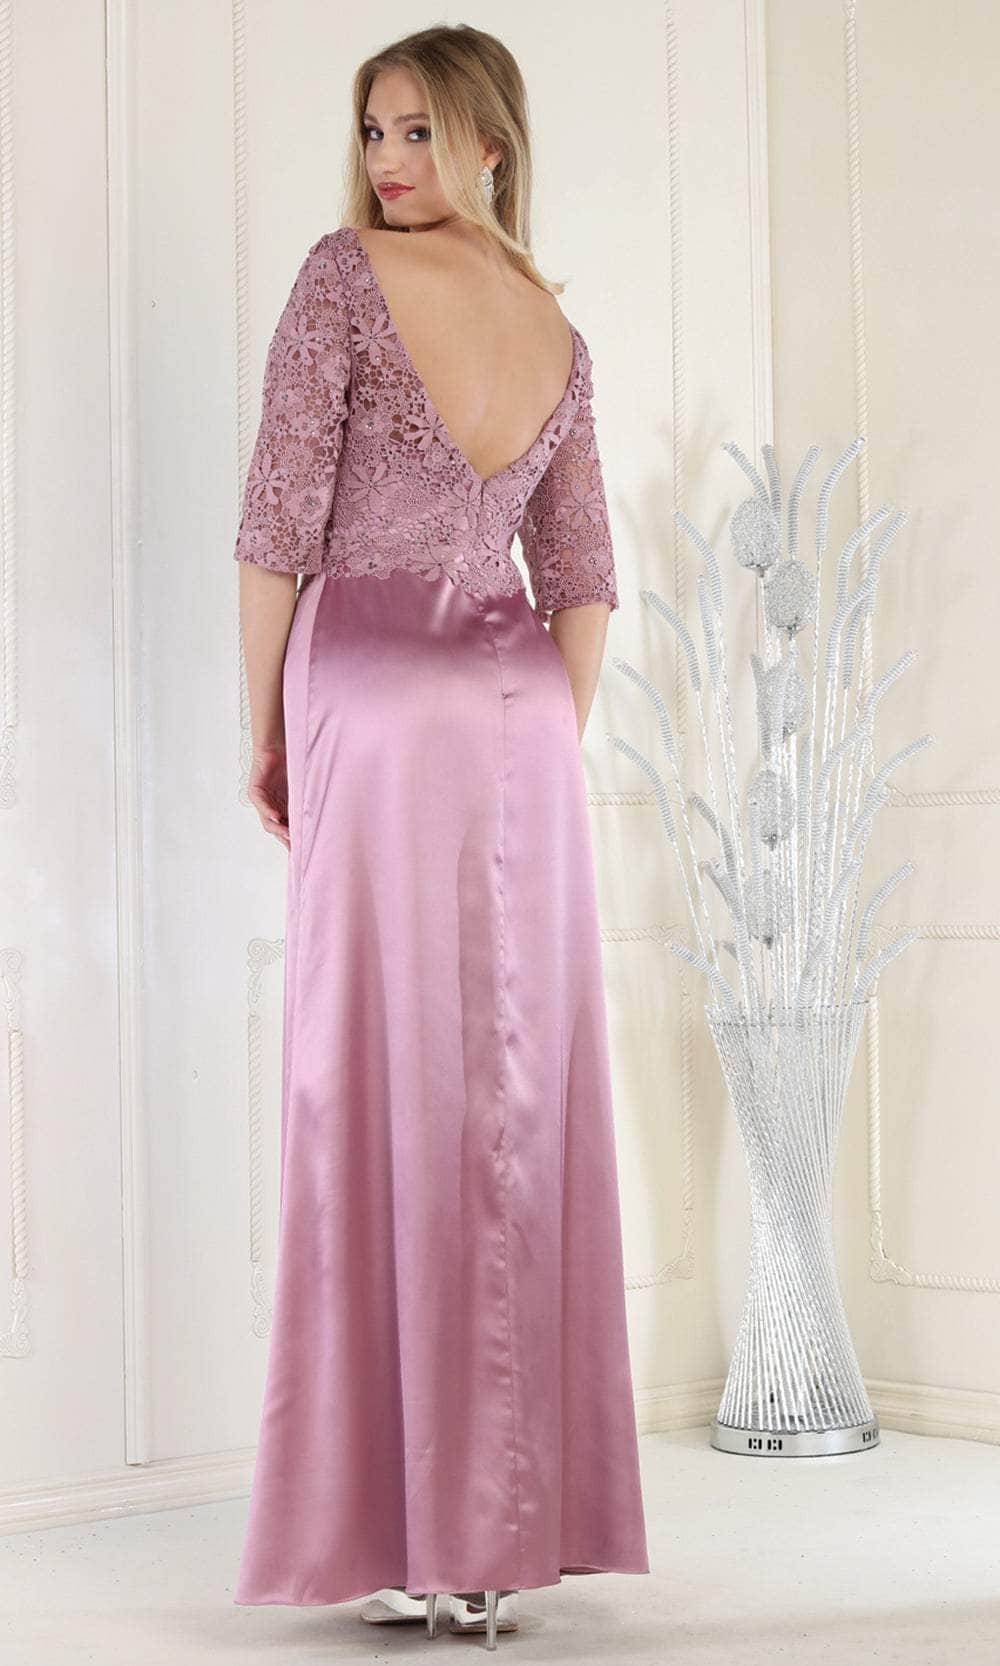 May Queen MQ1969 - Quarter Length Lace Satin Gown Military Ball